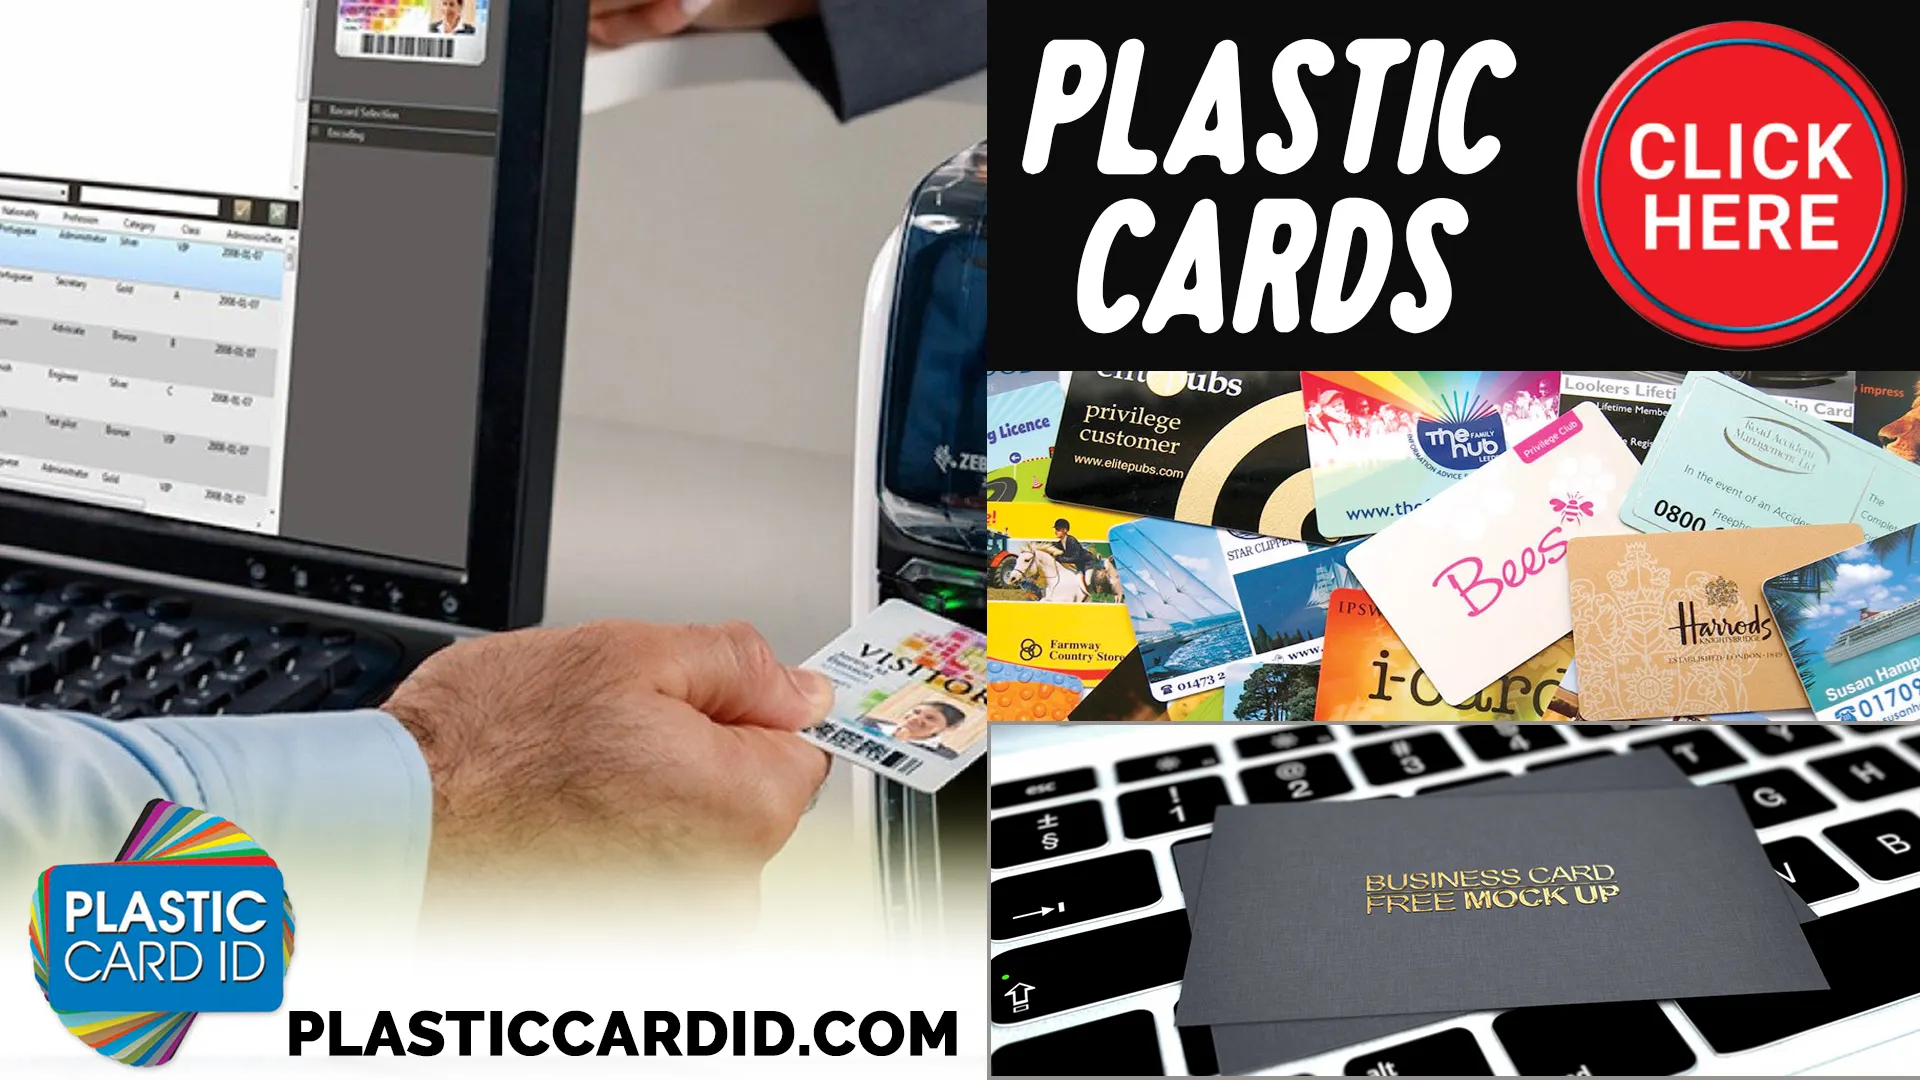 Welcome to A World of Uncompromised Security with Plastic Card ID
